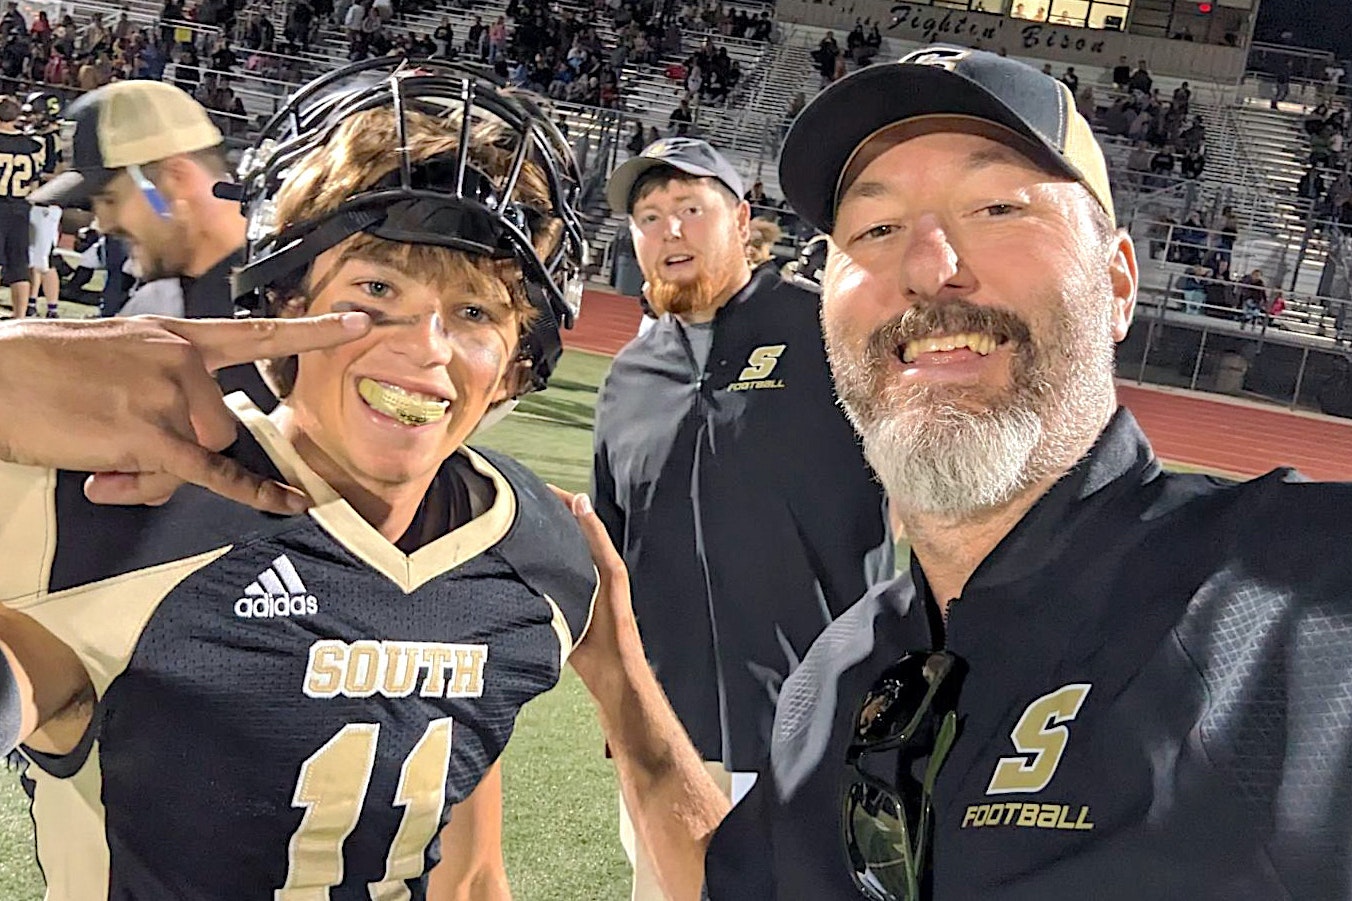 Cheyenne South Senior Keelan Anderson, left, and coach Eli Moody celebrate after Anderson nailed a state-record 61-yard field goal.